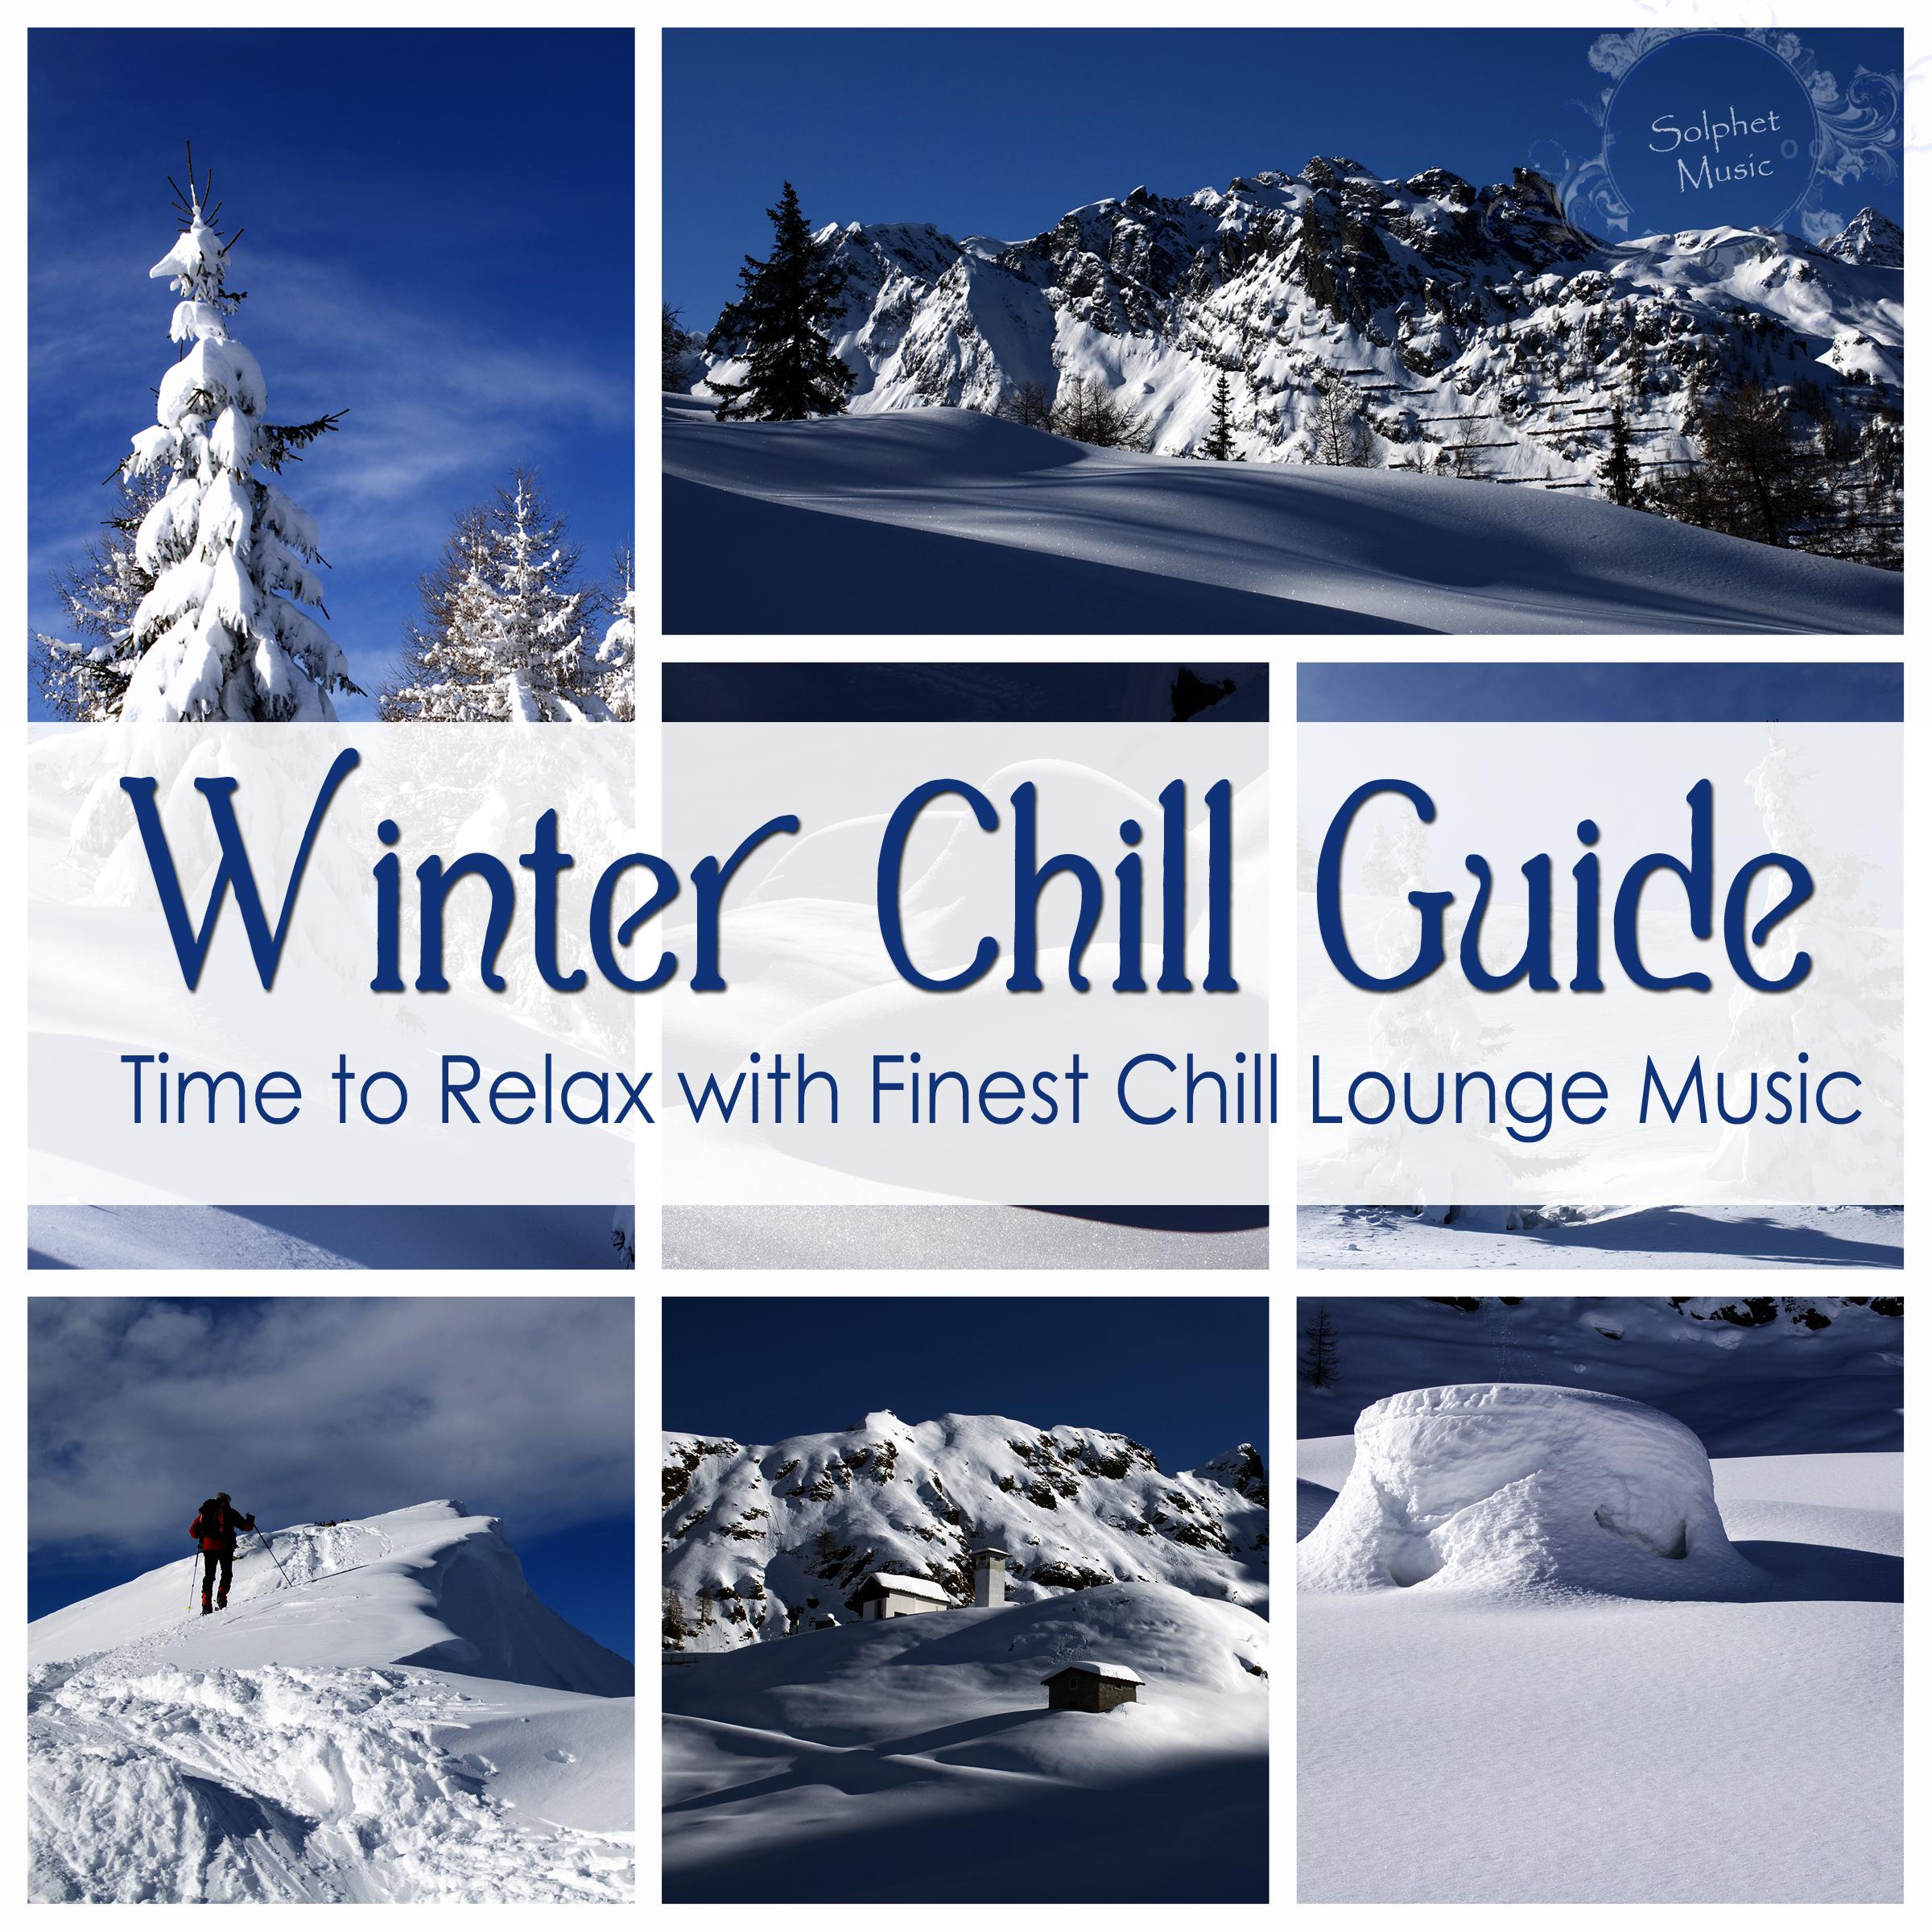 Winter Chill Guide (Time to Relax with Finest Chill Lounge Music)